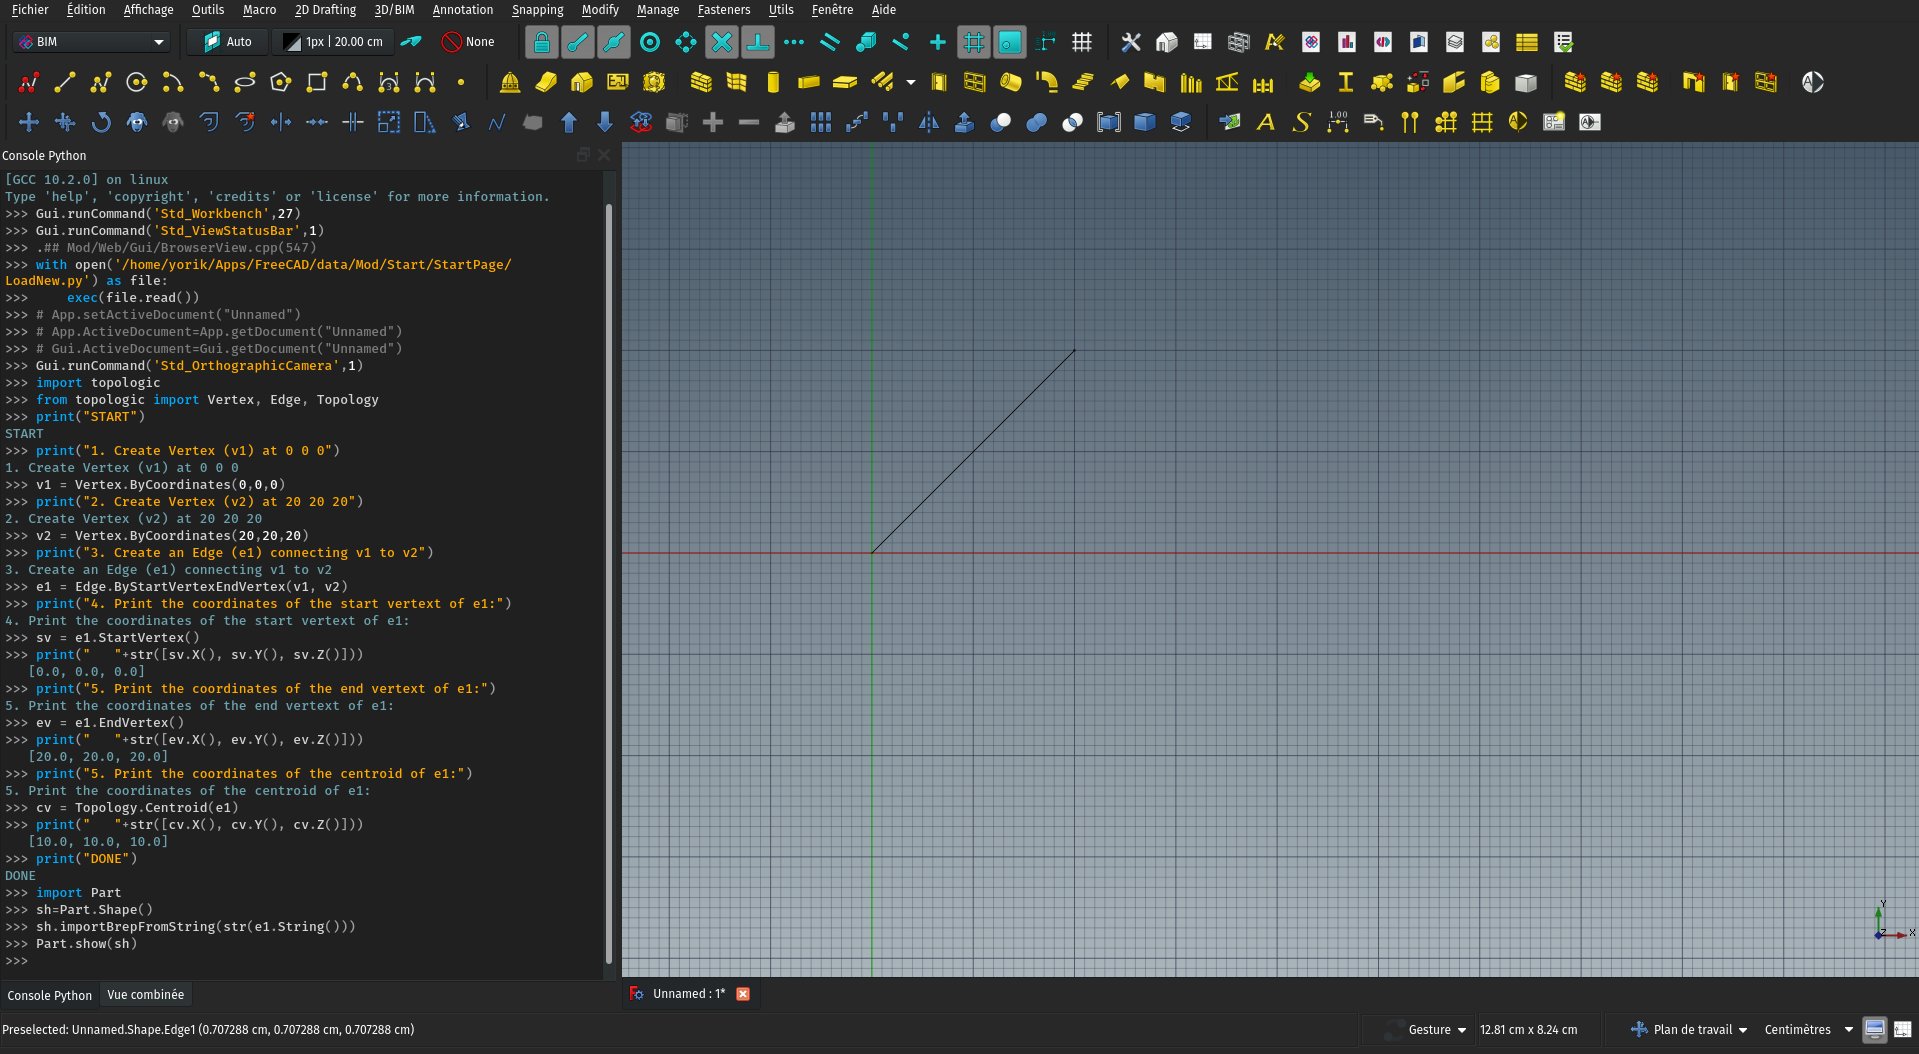 A screenshot showing Topologic being manipulated in the FreeCAD console